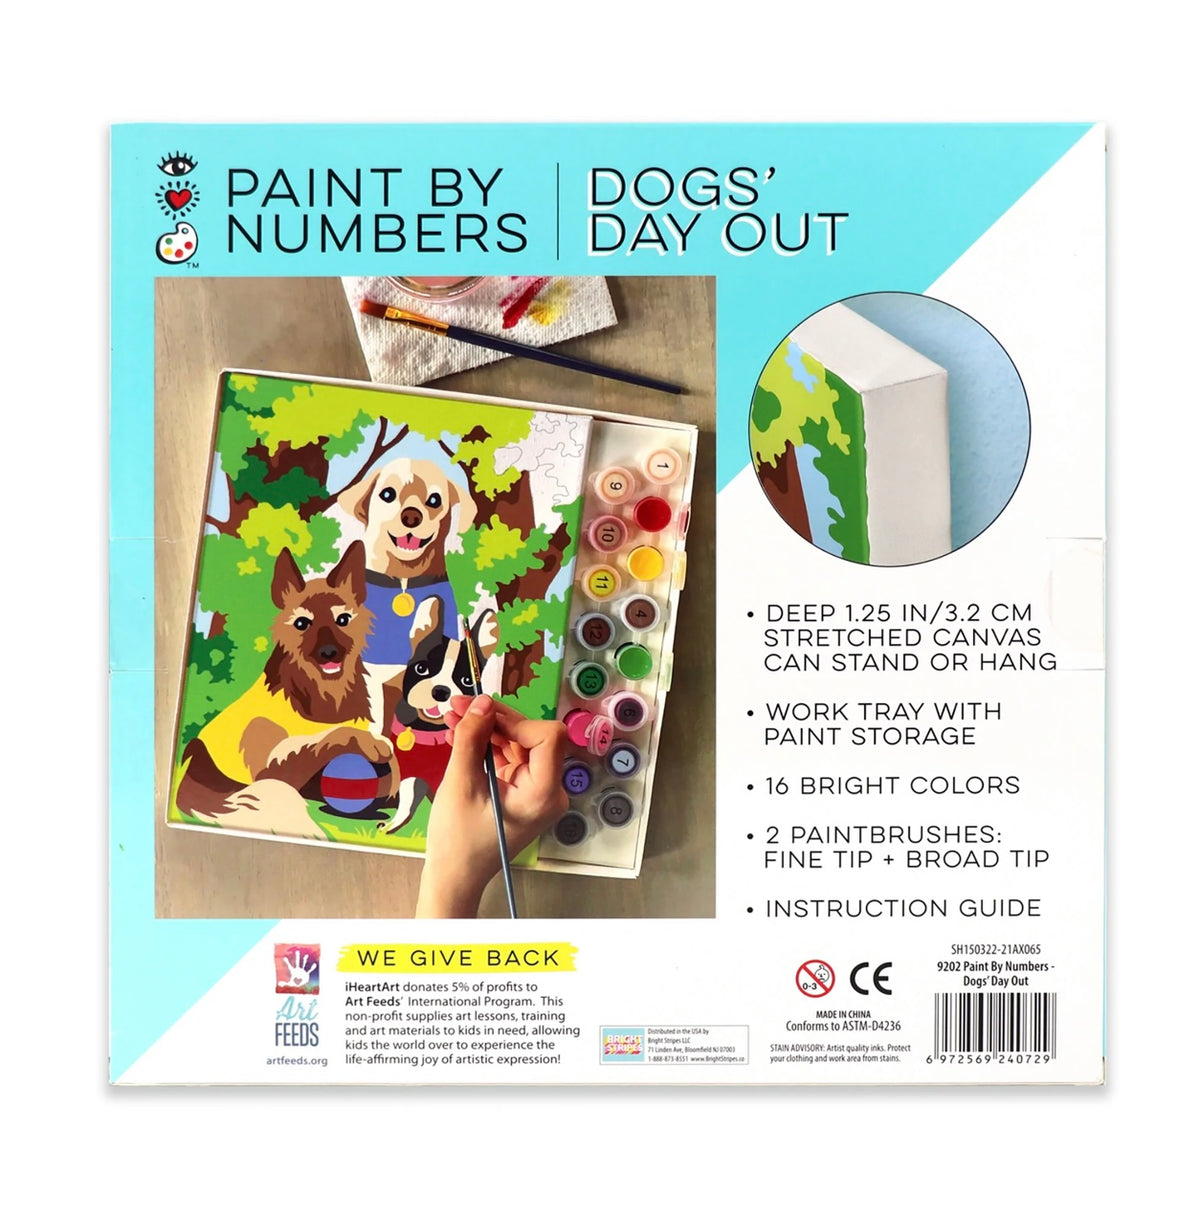 iHeartArt | Paint by Numbers | Dogs Day Out